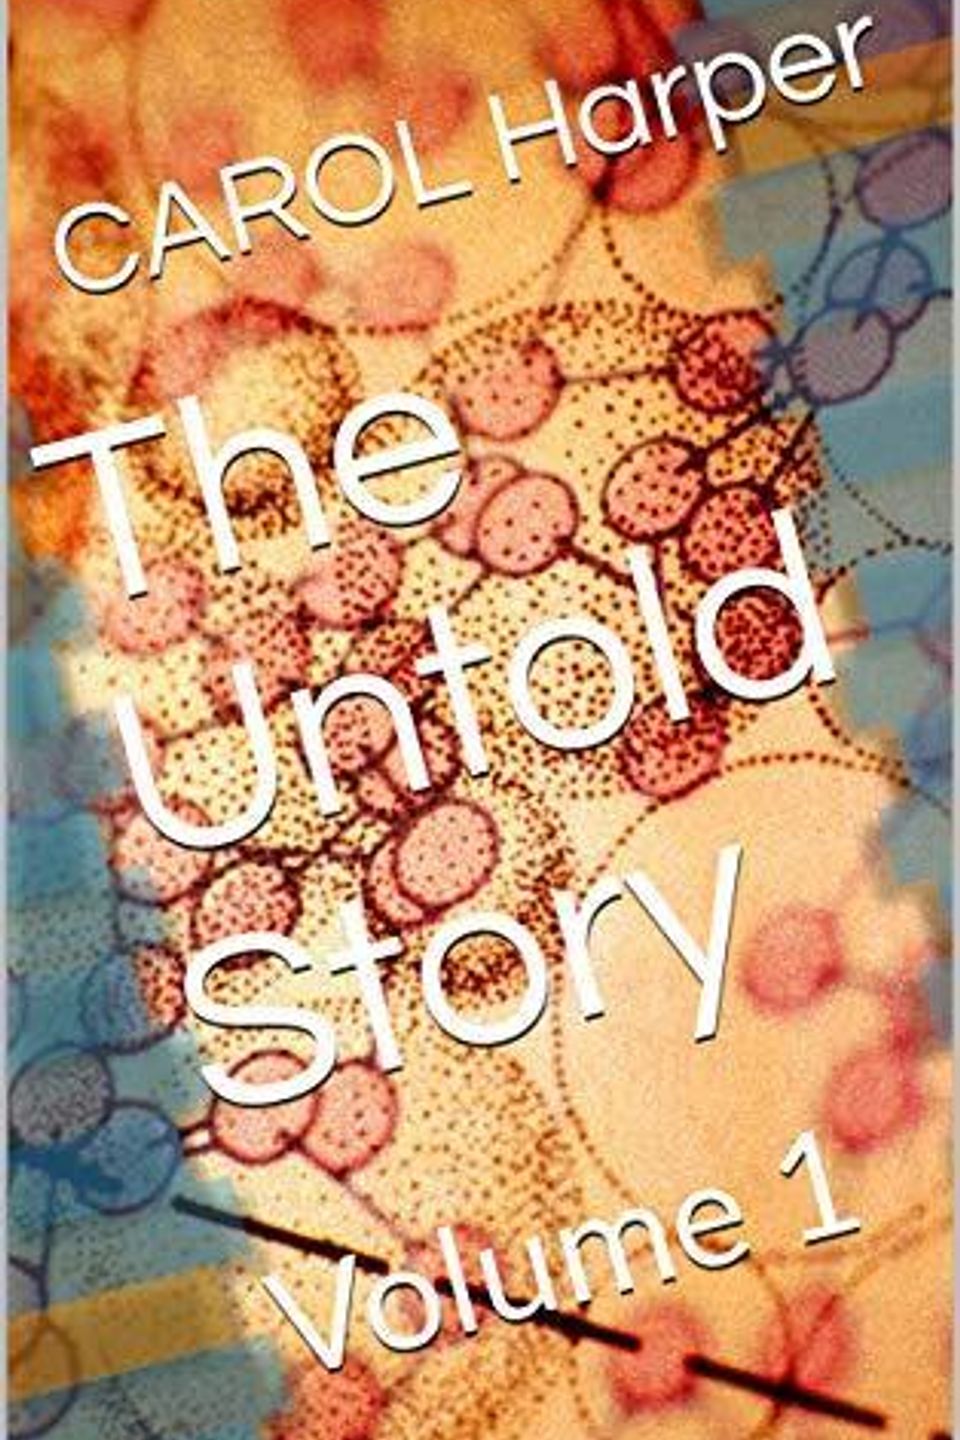 The untold story vol 1